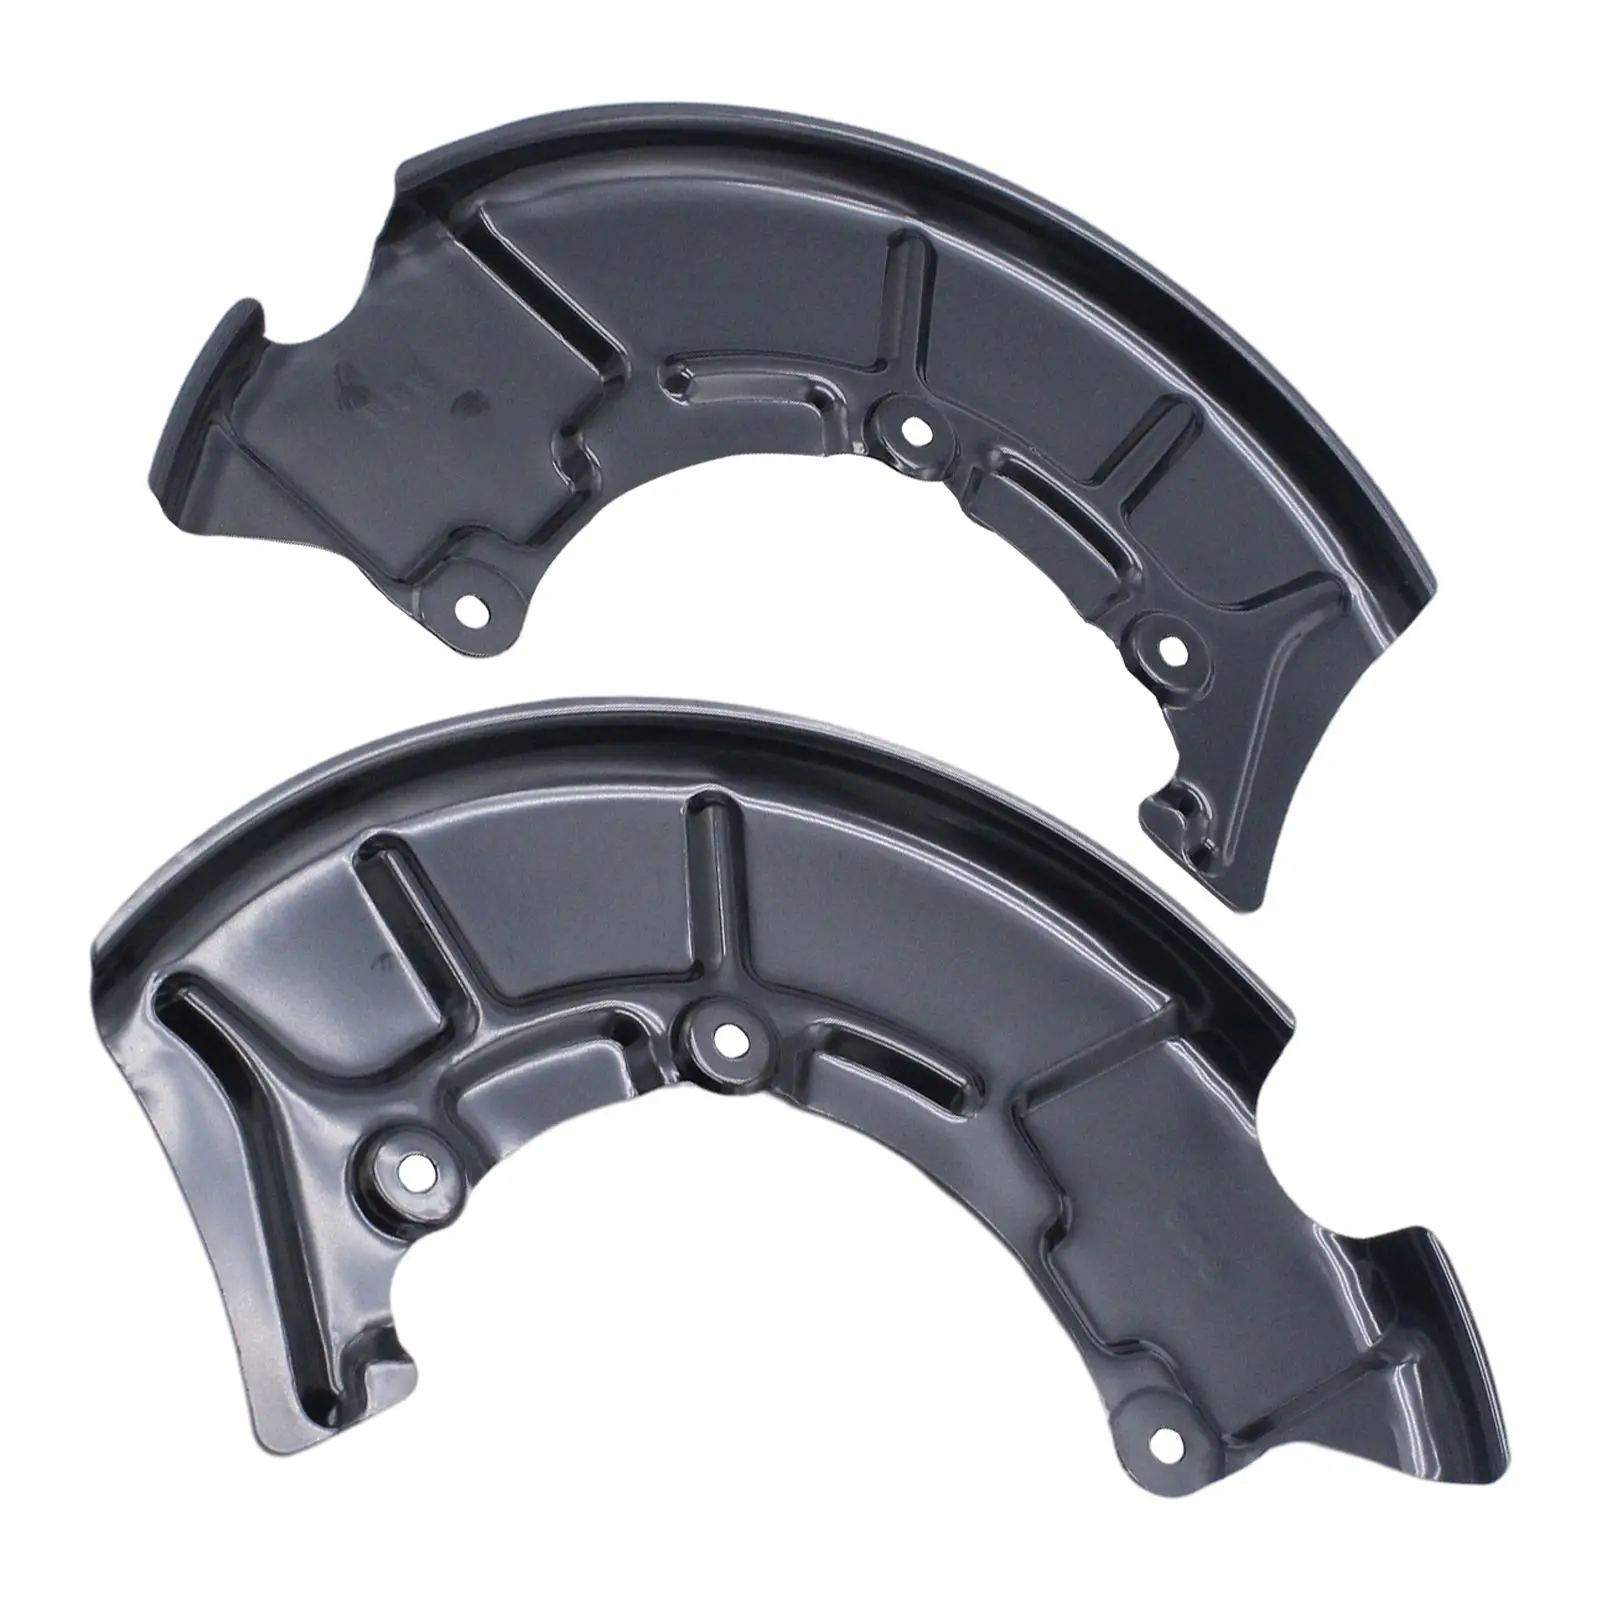 1 Pair Front Disc Brake Cover Dust Shield Splashguard for Golf 2000-2004 1J0615311A Replacement Parts Acc